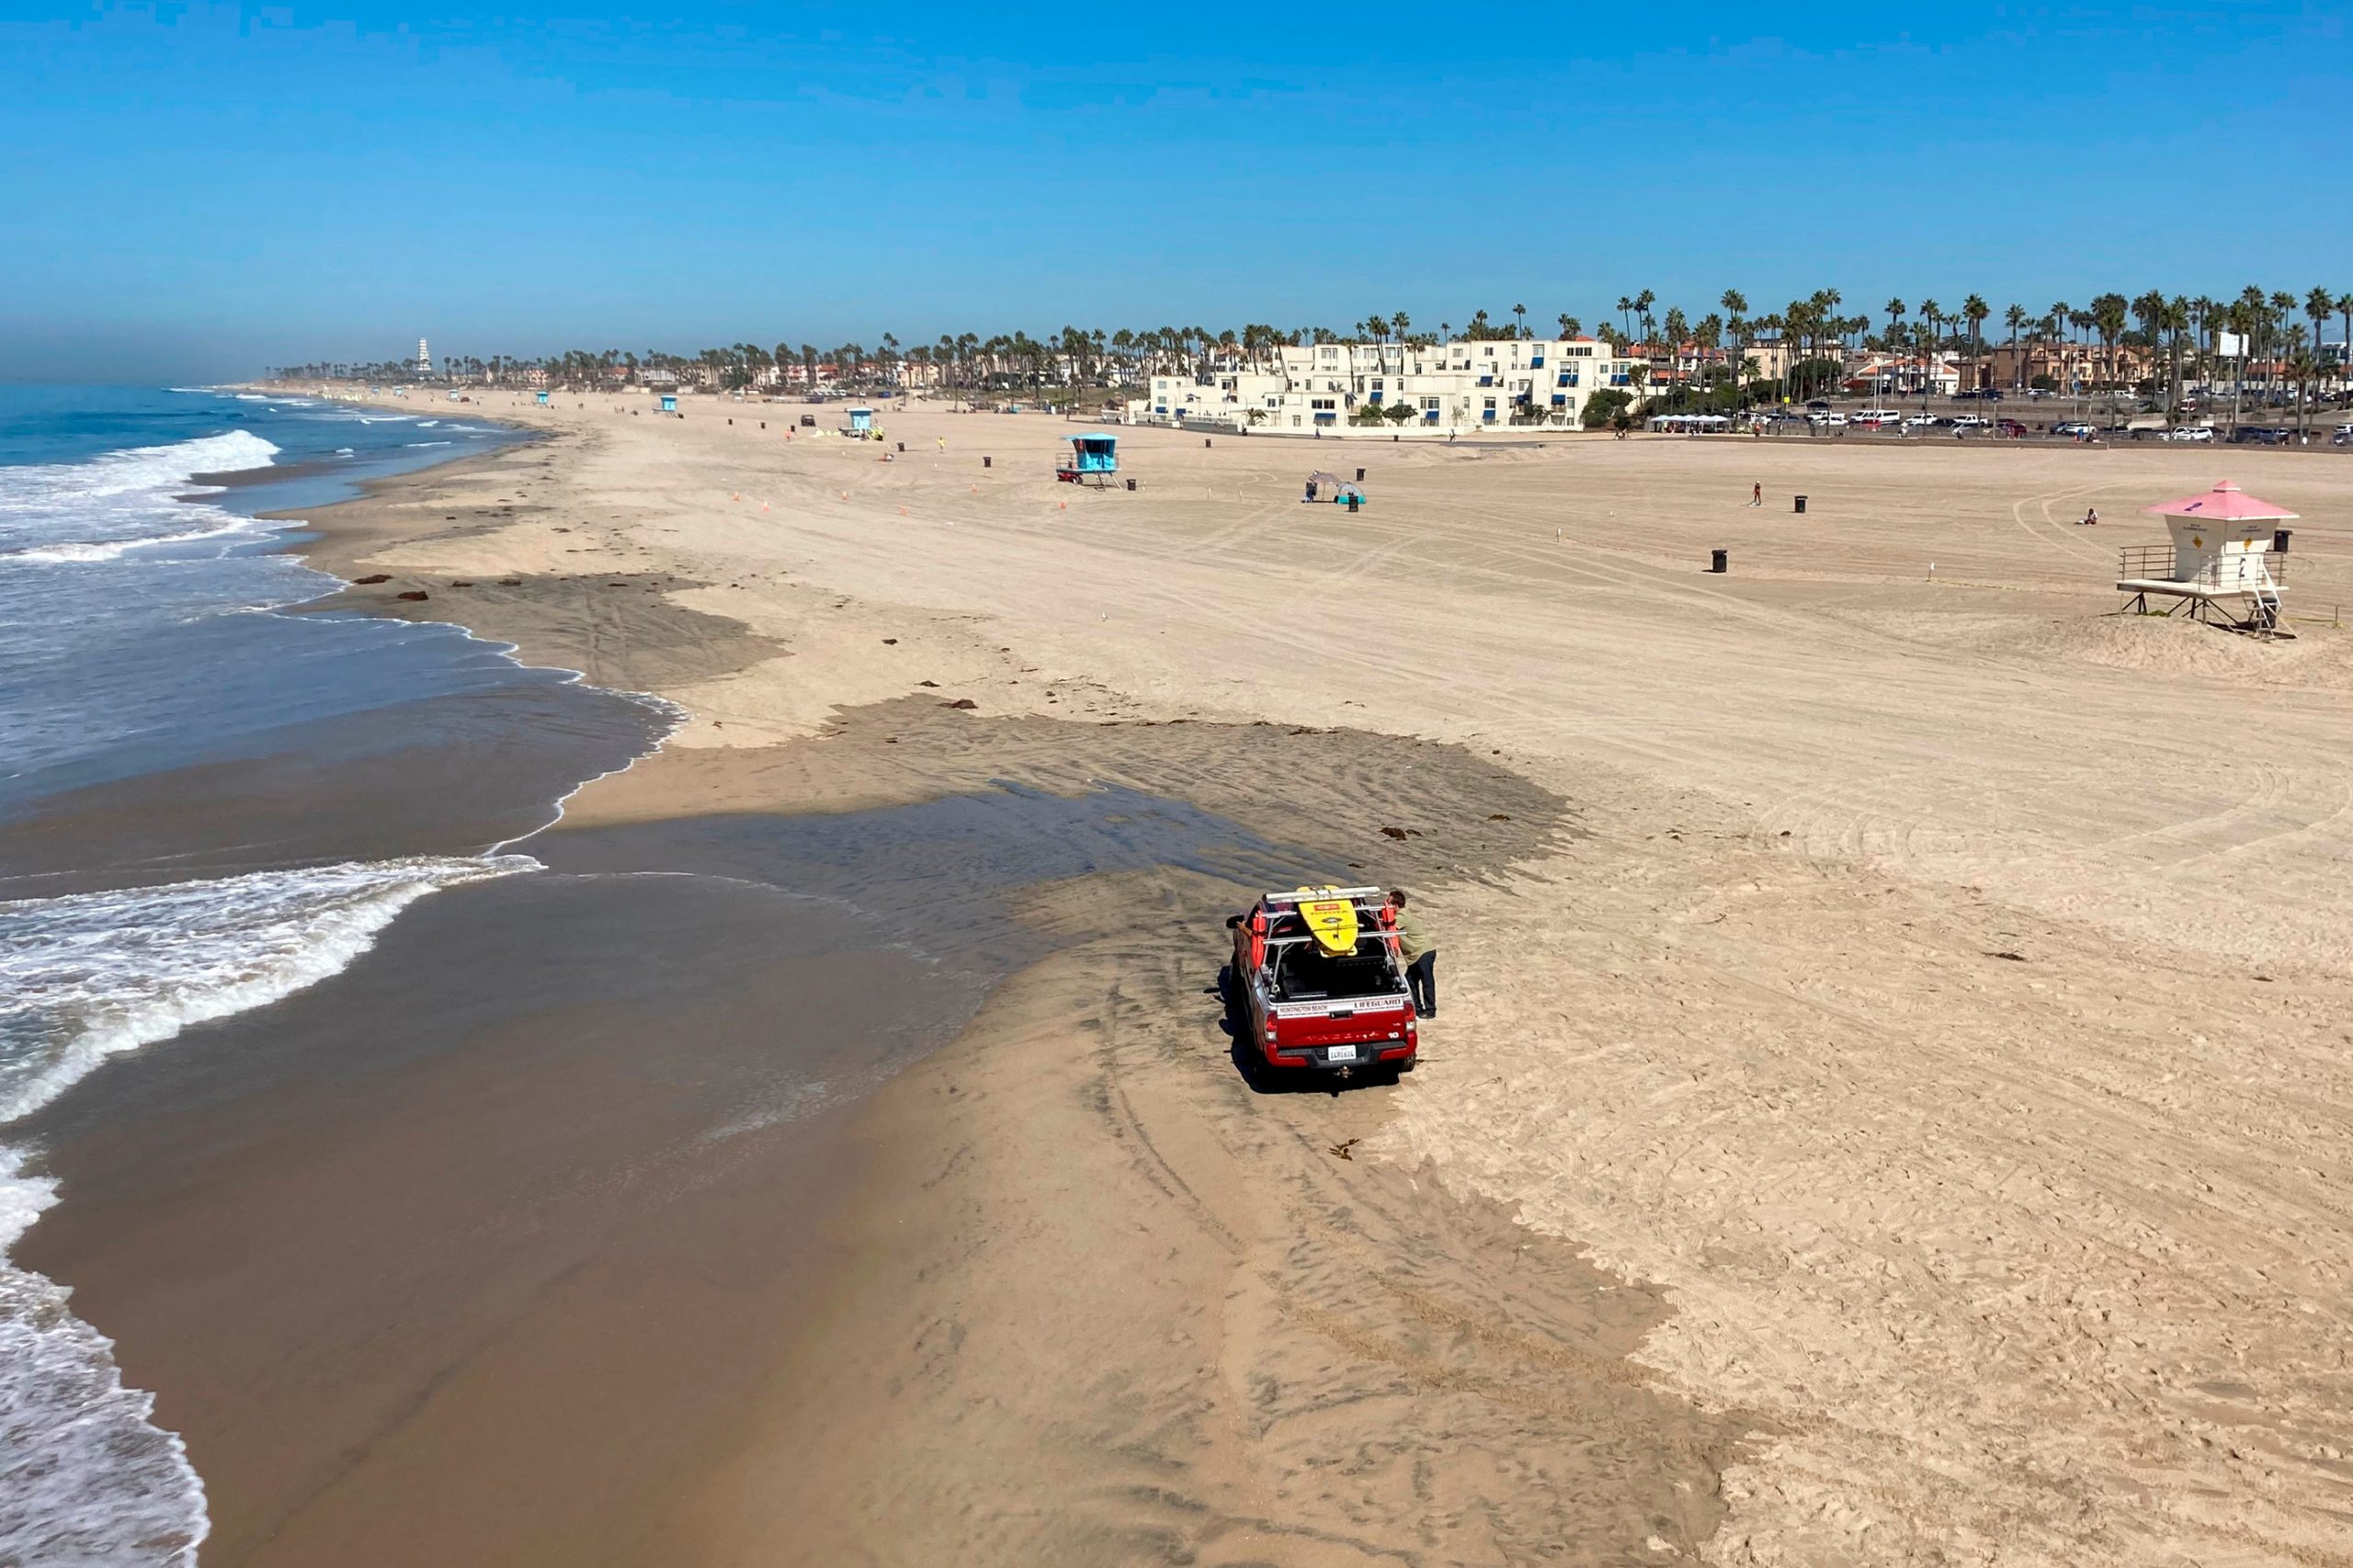 Southern California beach all set to reopen after undersea oil spill